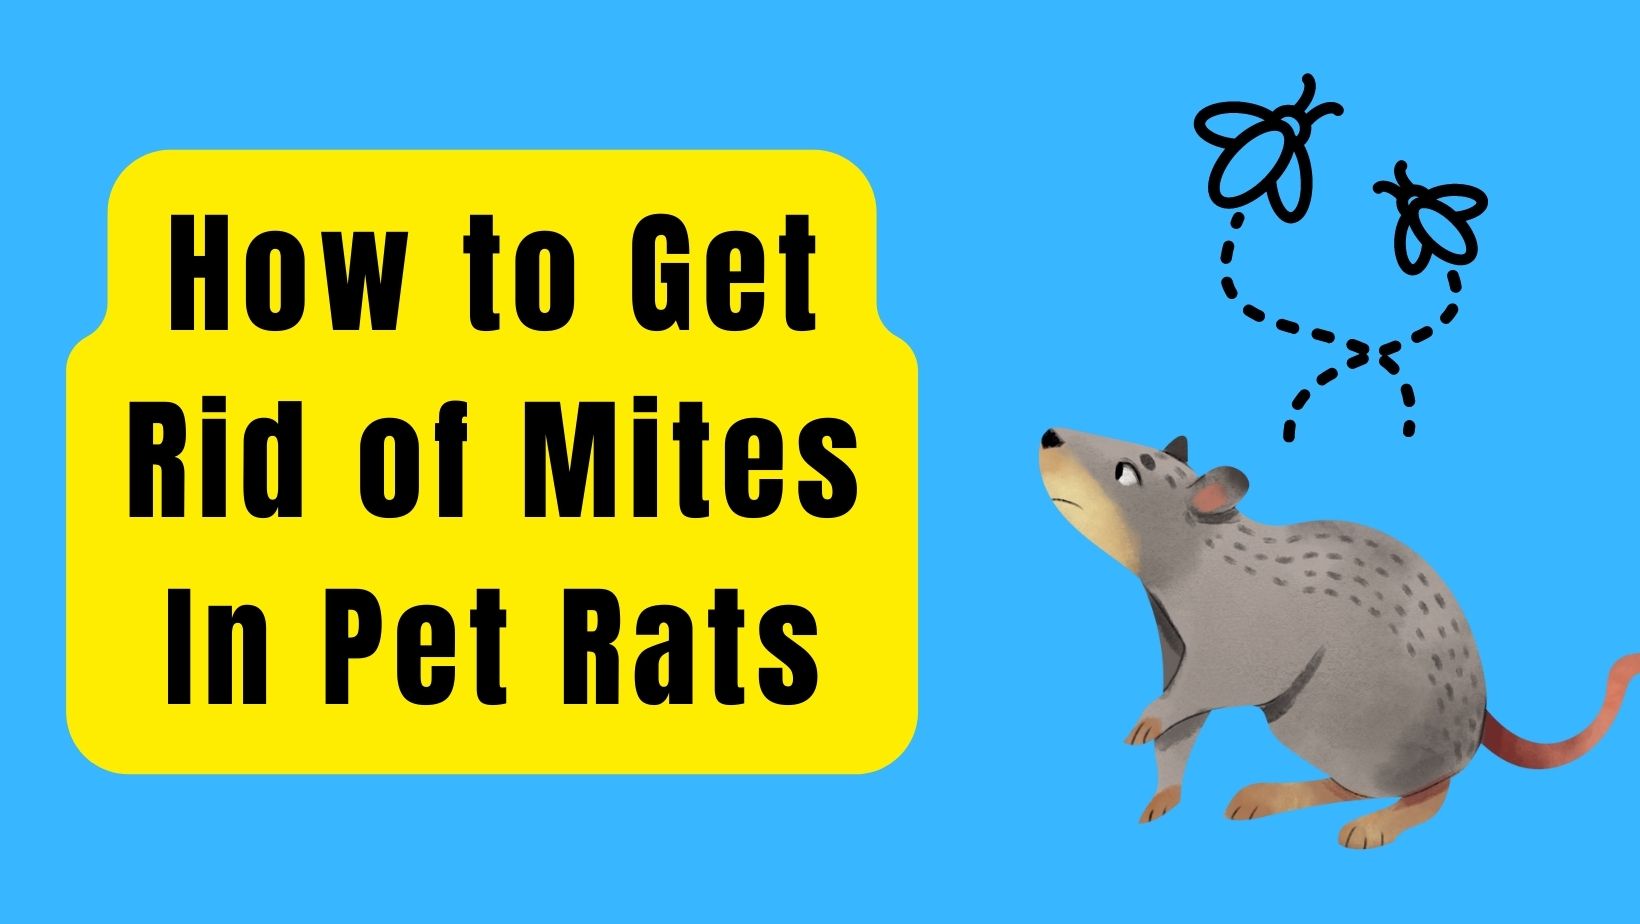 How to Get Rid of Mites In Pet Rats